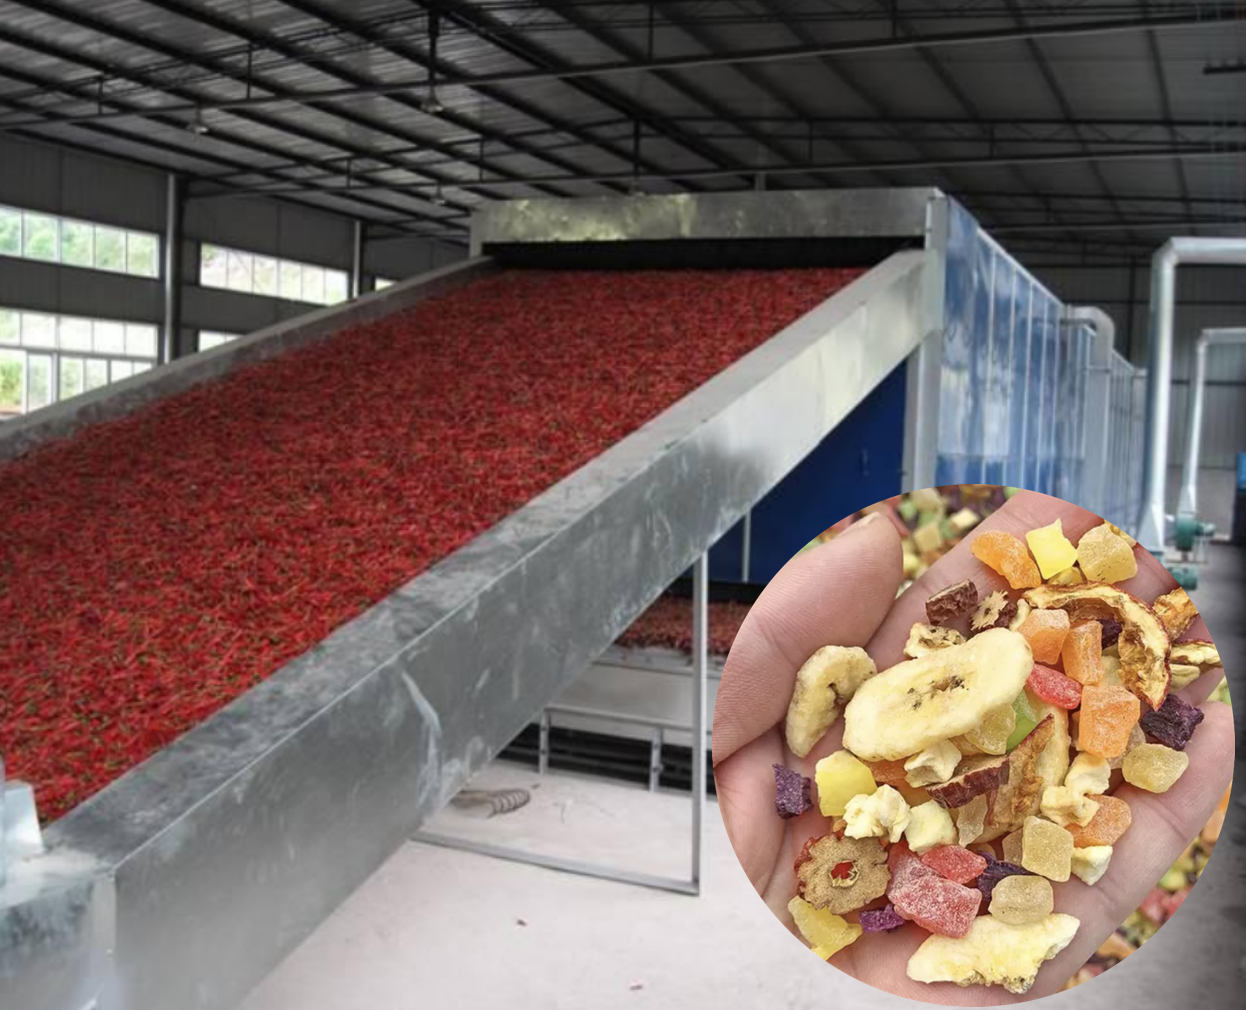 Dehydrated fruit vegetable processing line